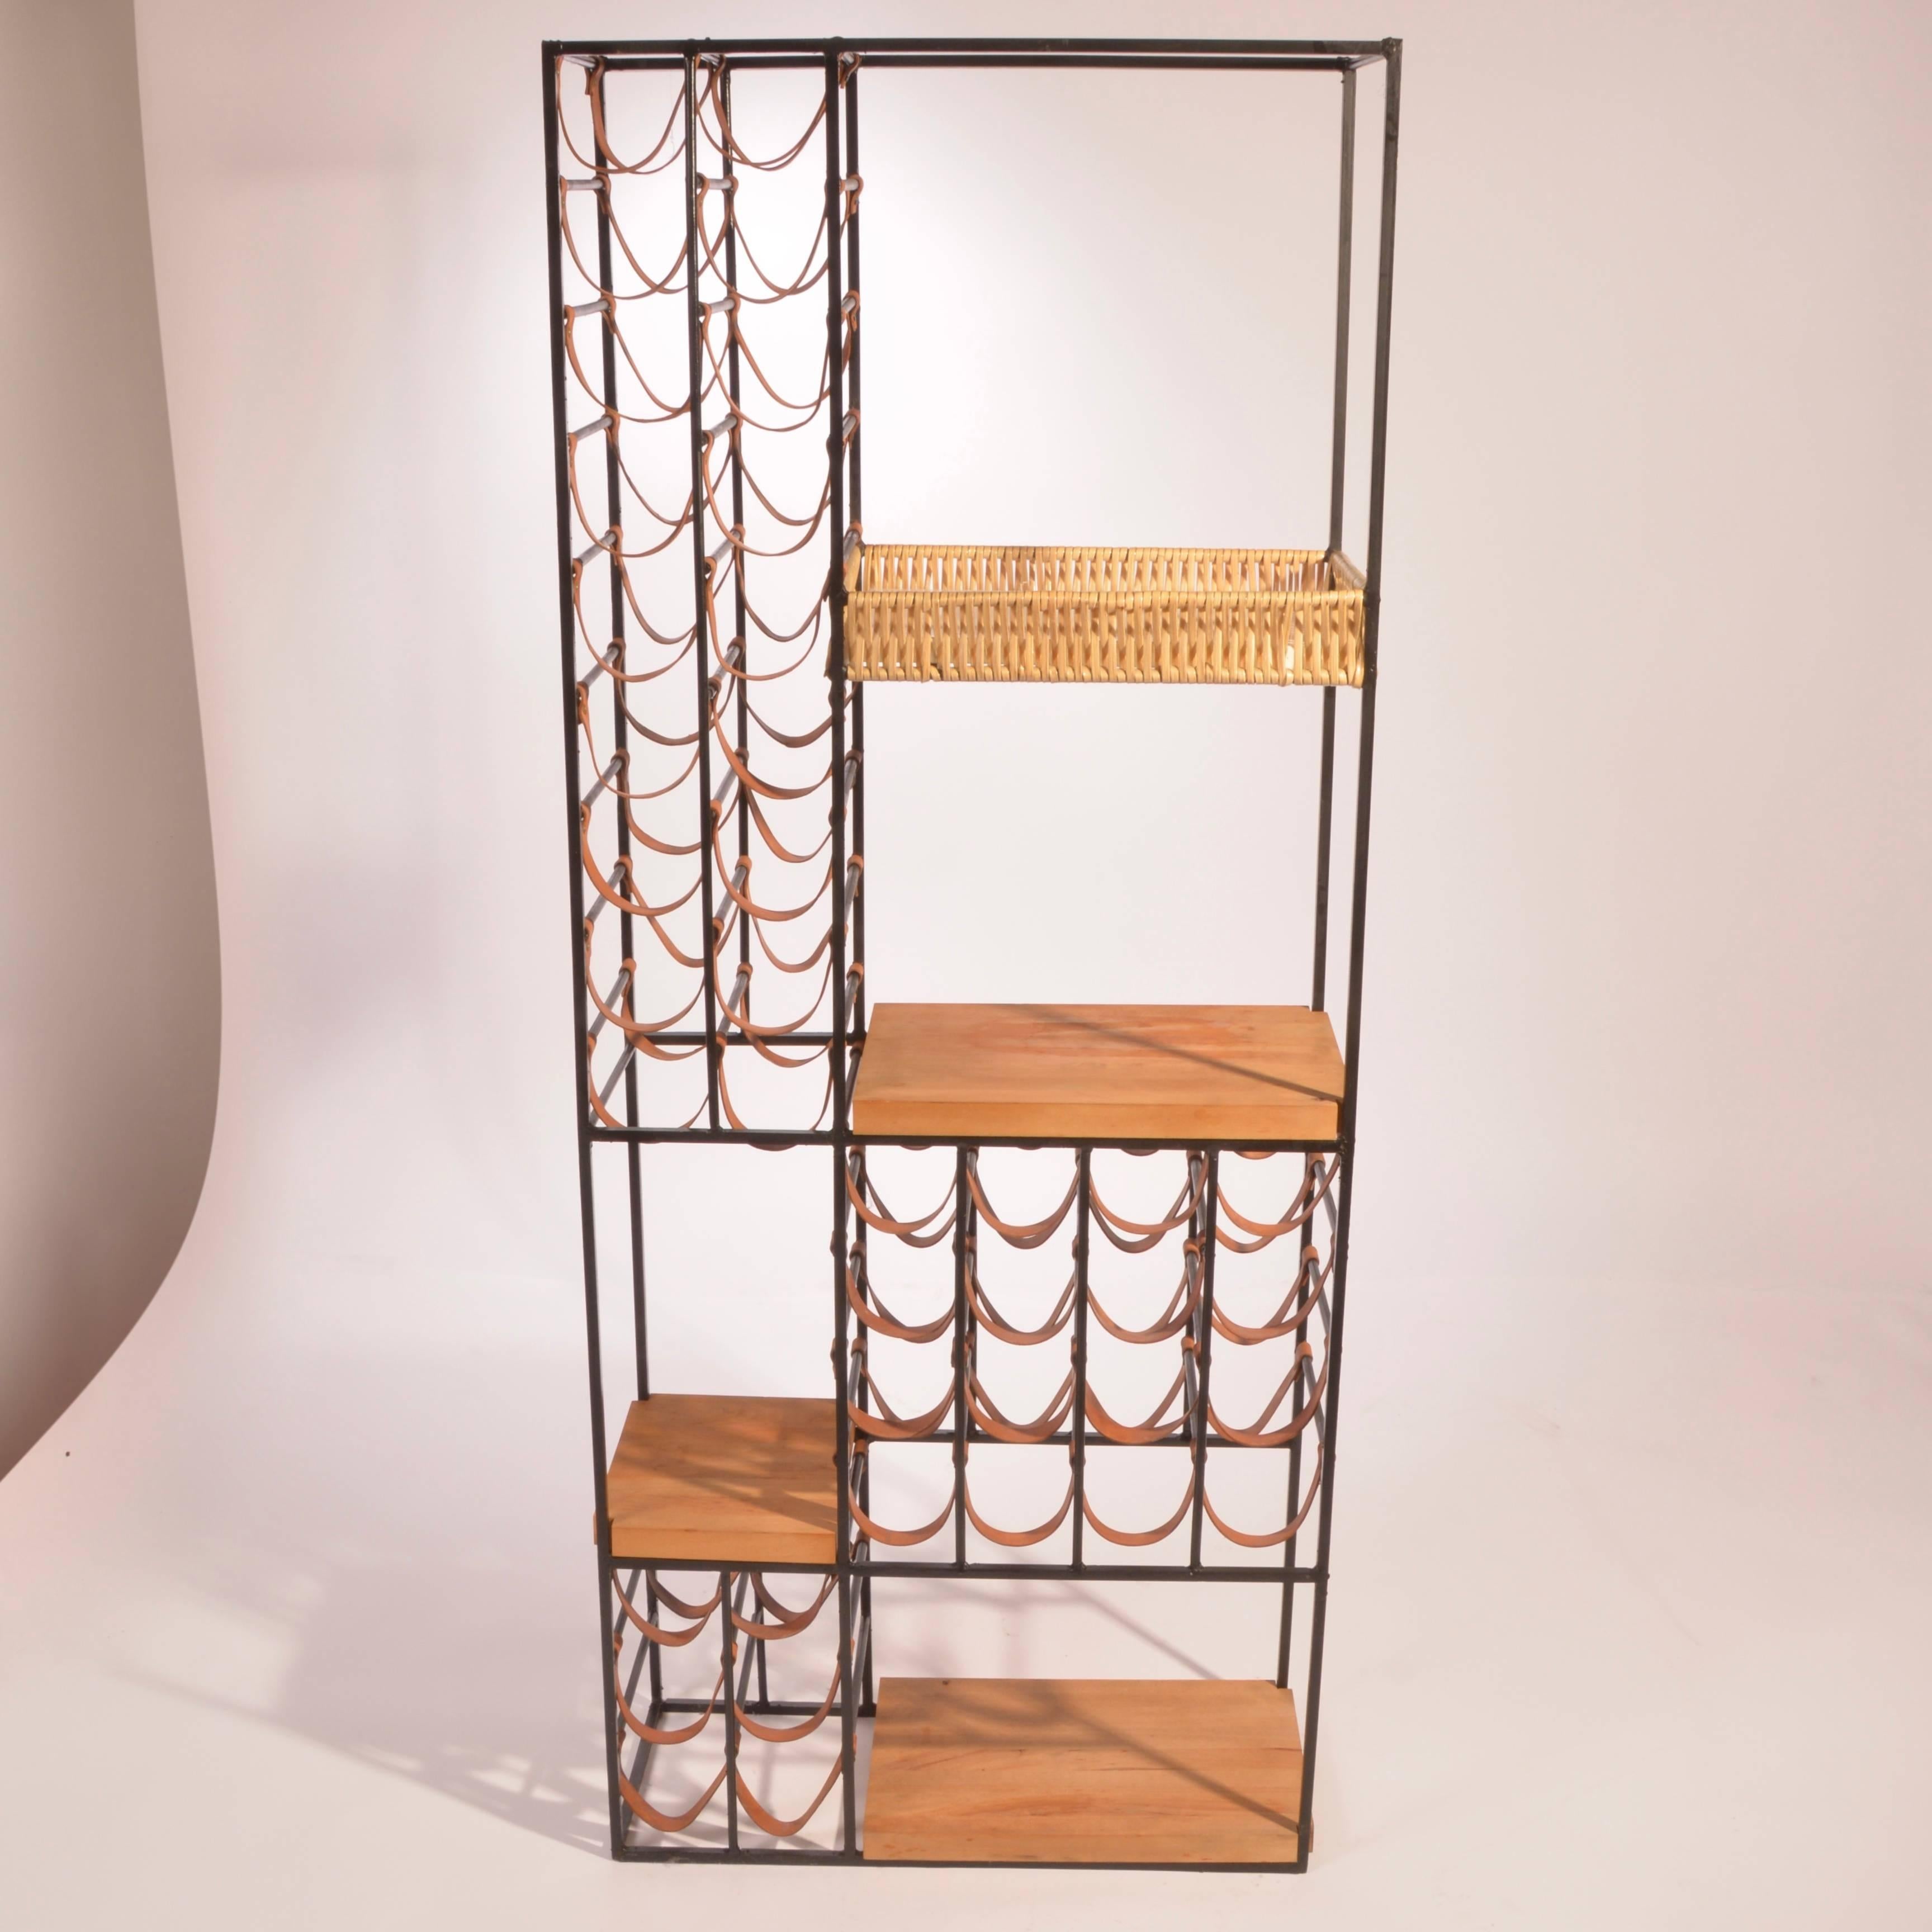 This iconic wine rack was designed by Arthur Umanoff for Shaver Howard in 1954.